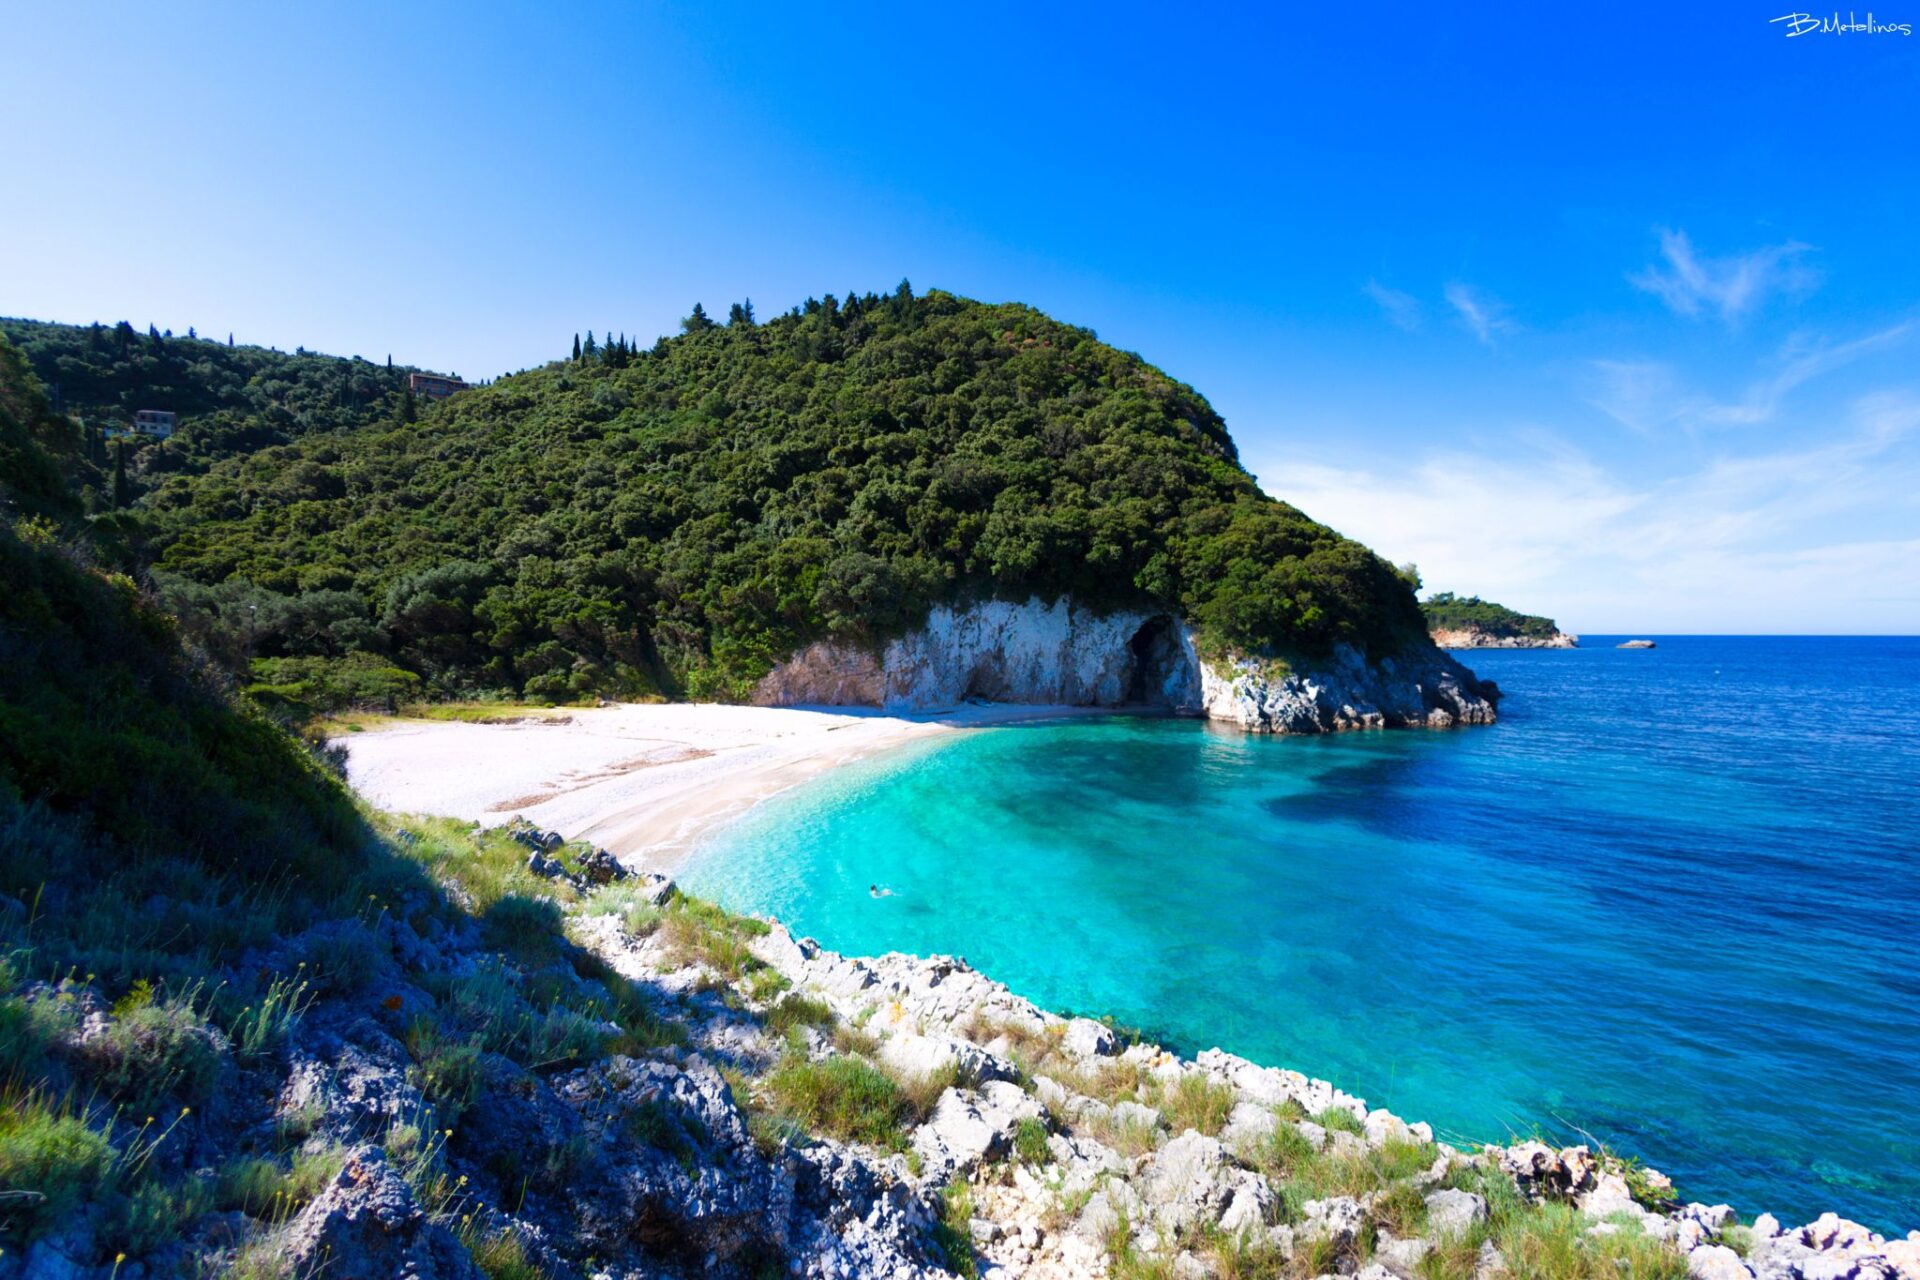 Private Corfu Beaches Tour: Discover the Most Iconic Beaches